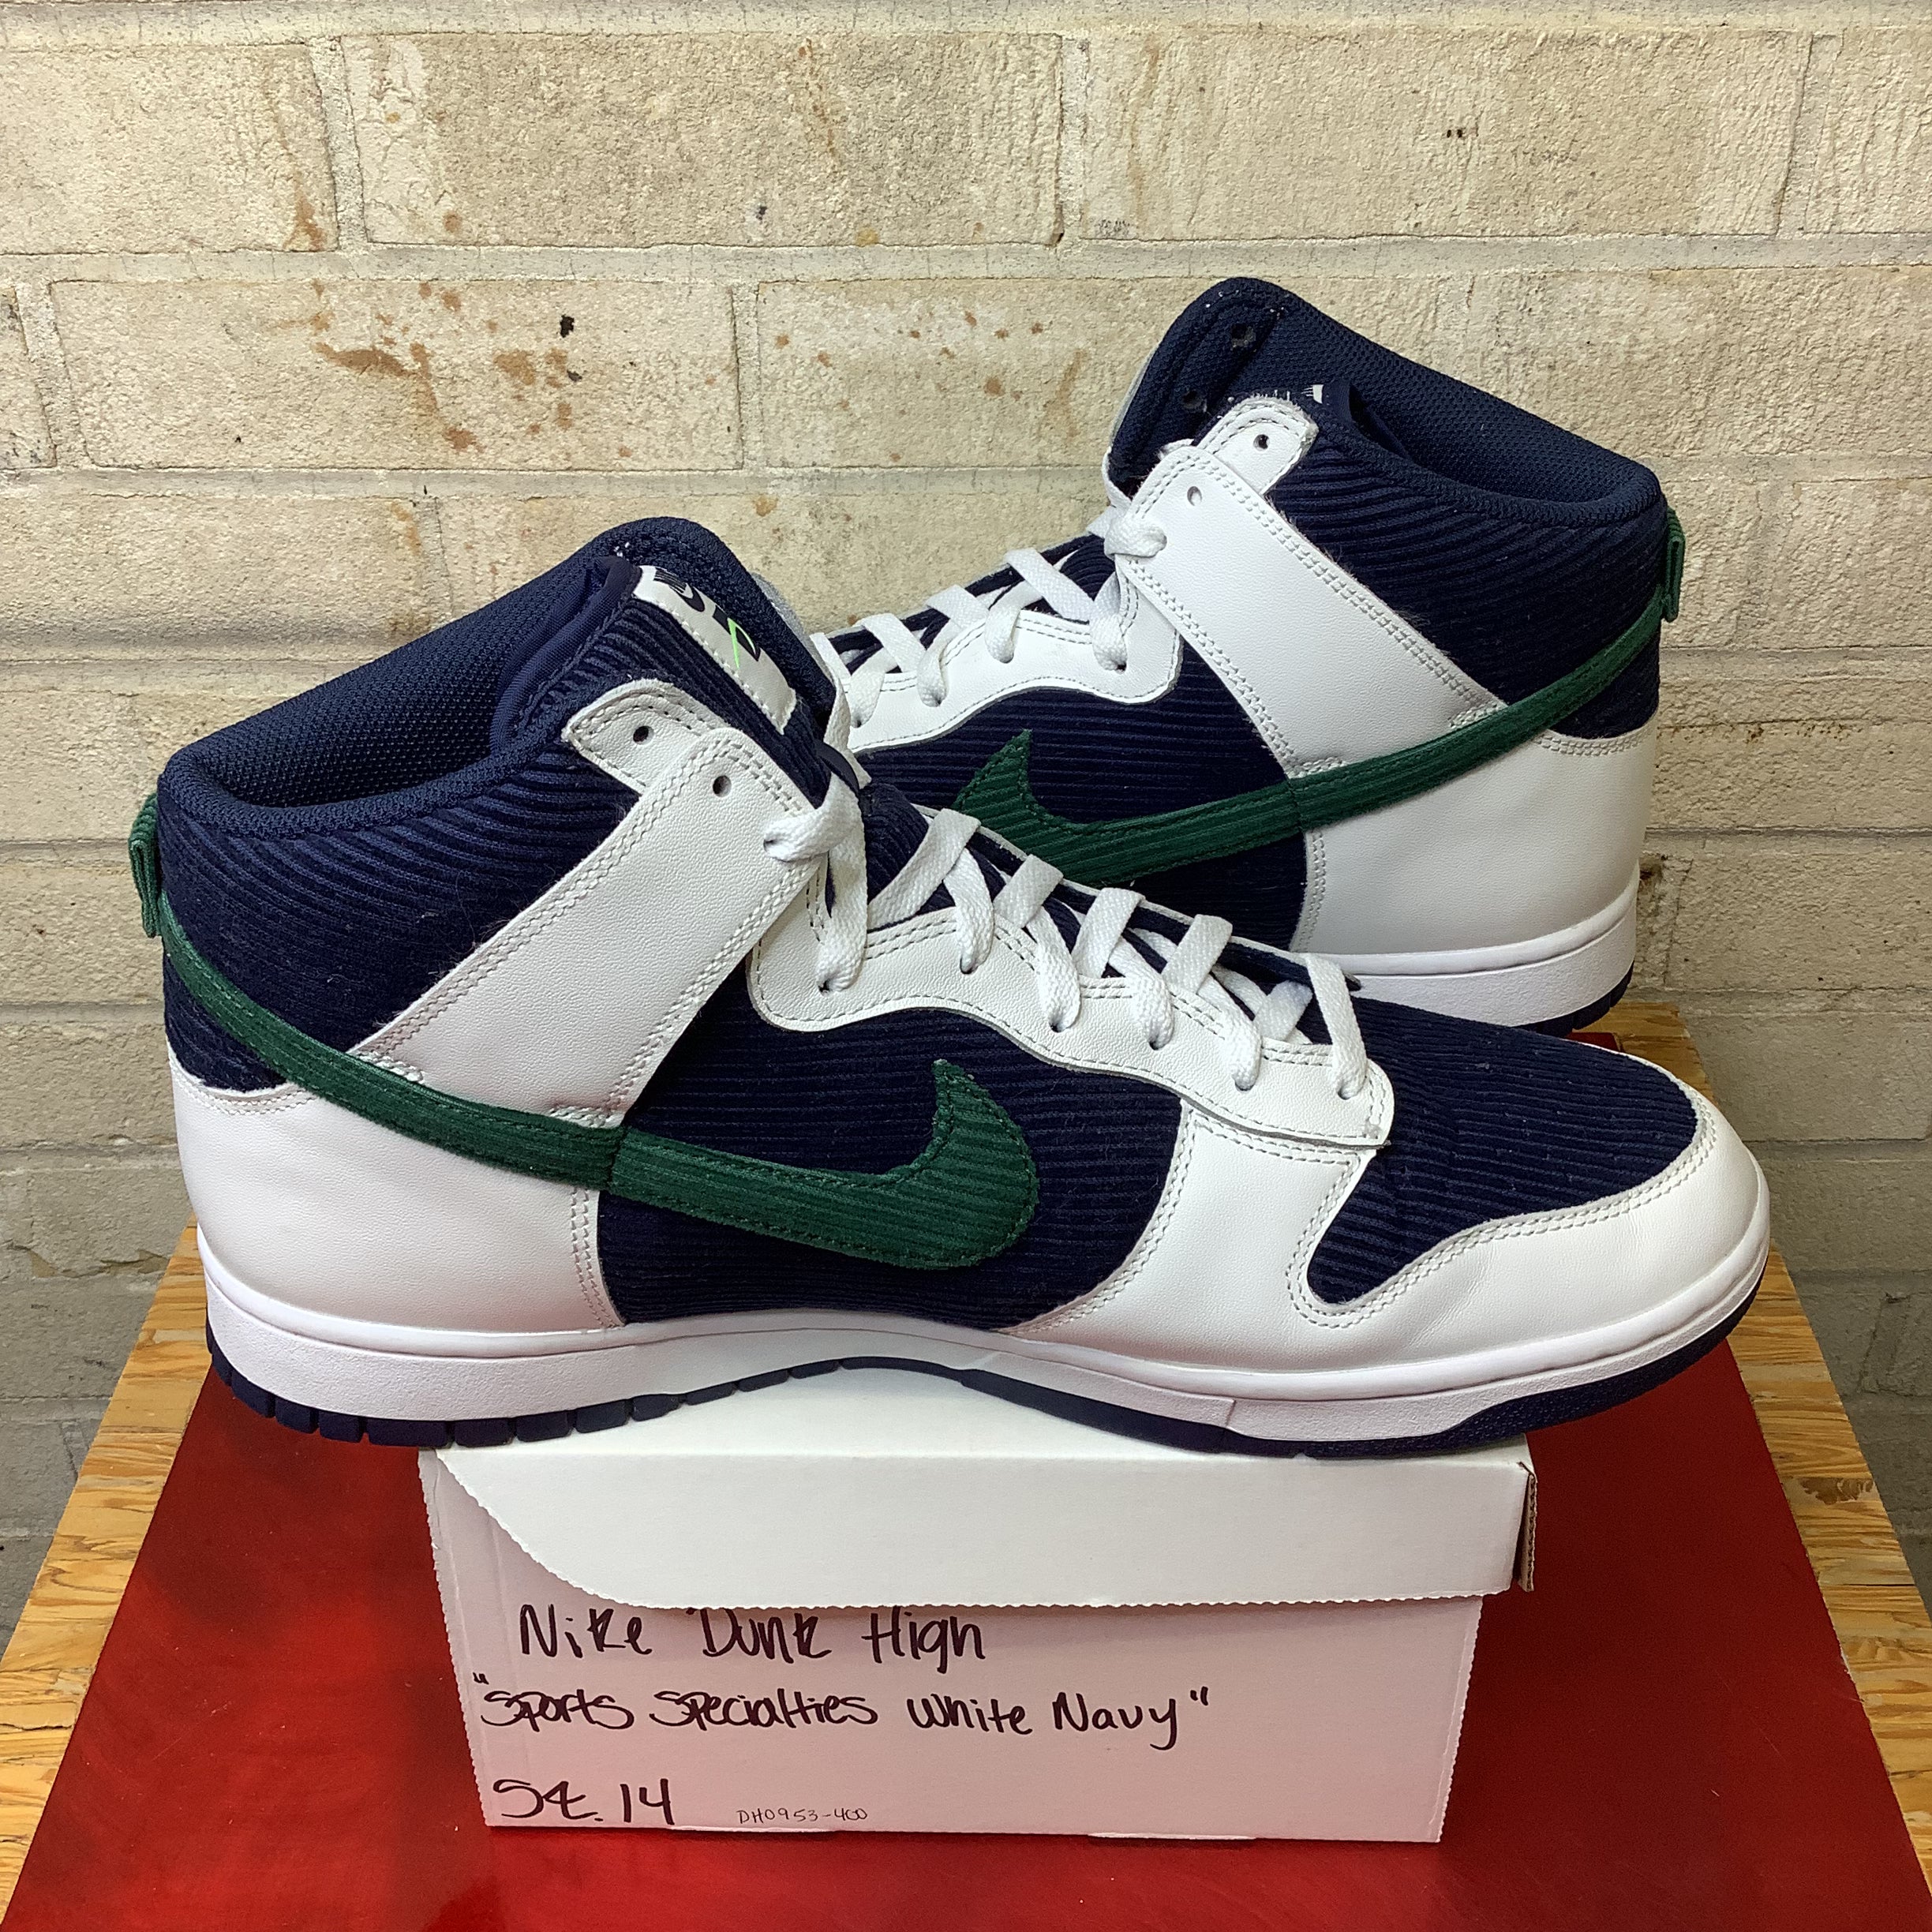 NIKE DUNK HIGH SPORTS SPECIALTIES WHITE NAVY SIZE 14 DH0953-400